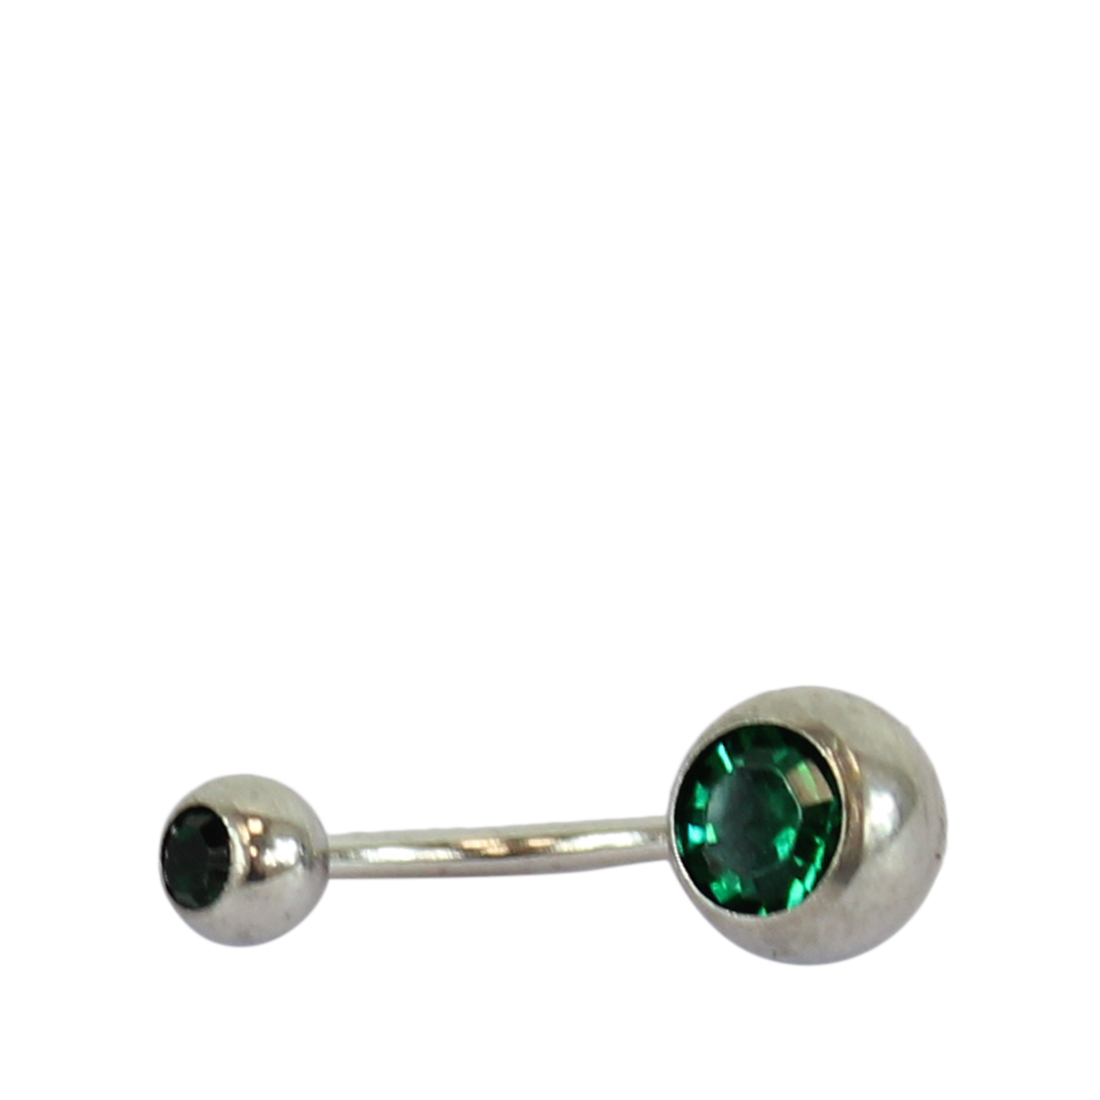 Belly button ring with diamond